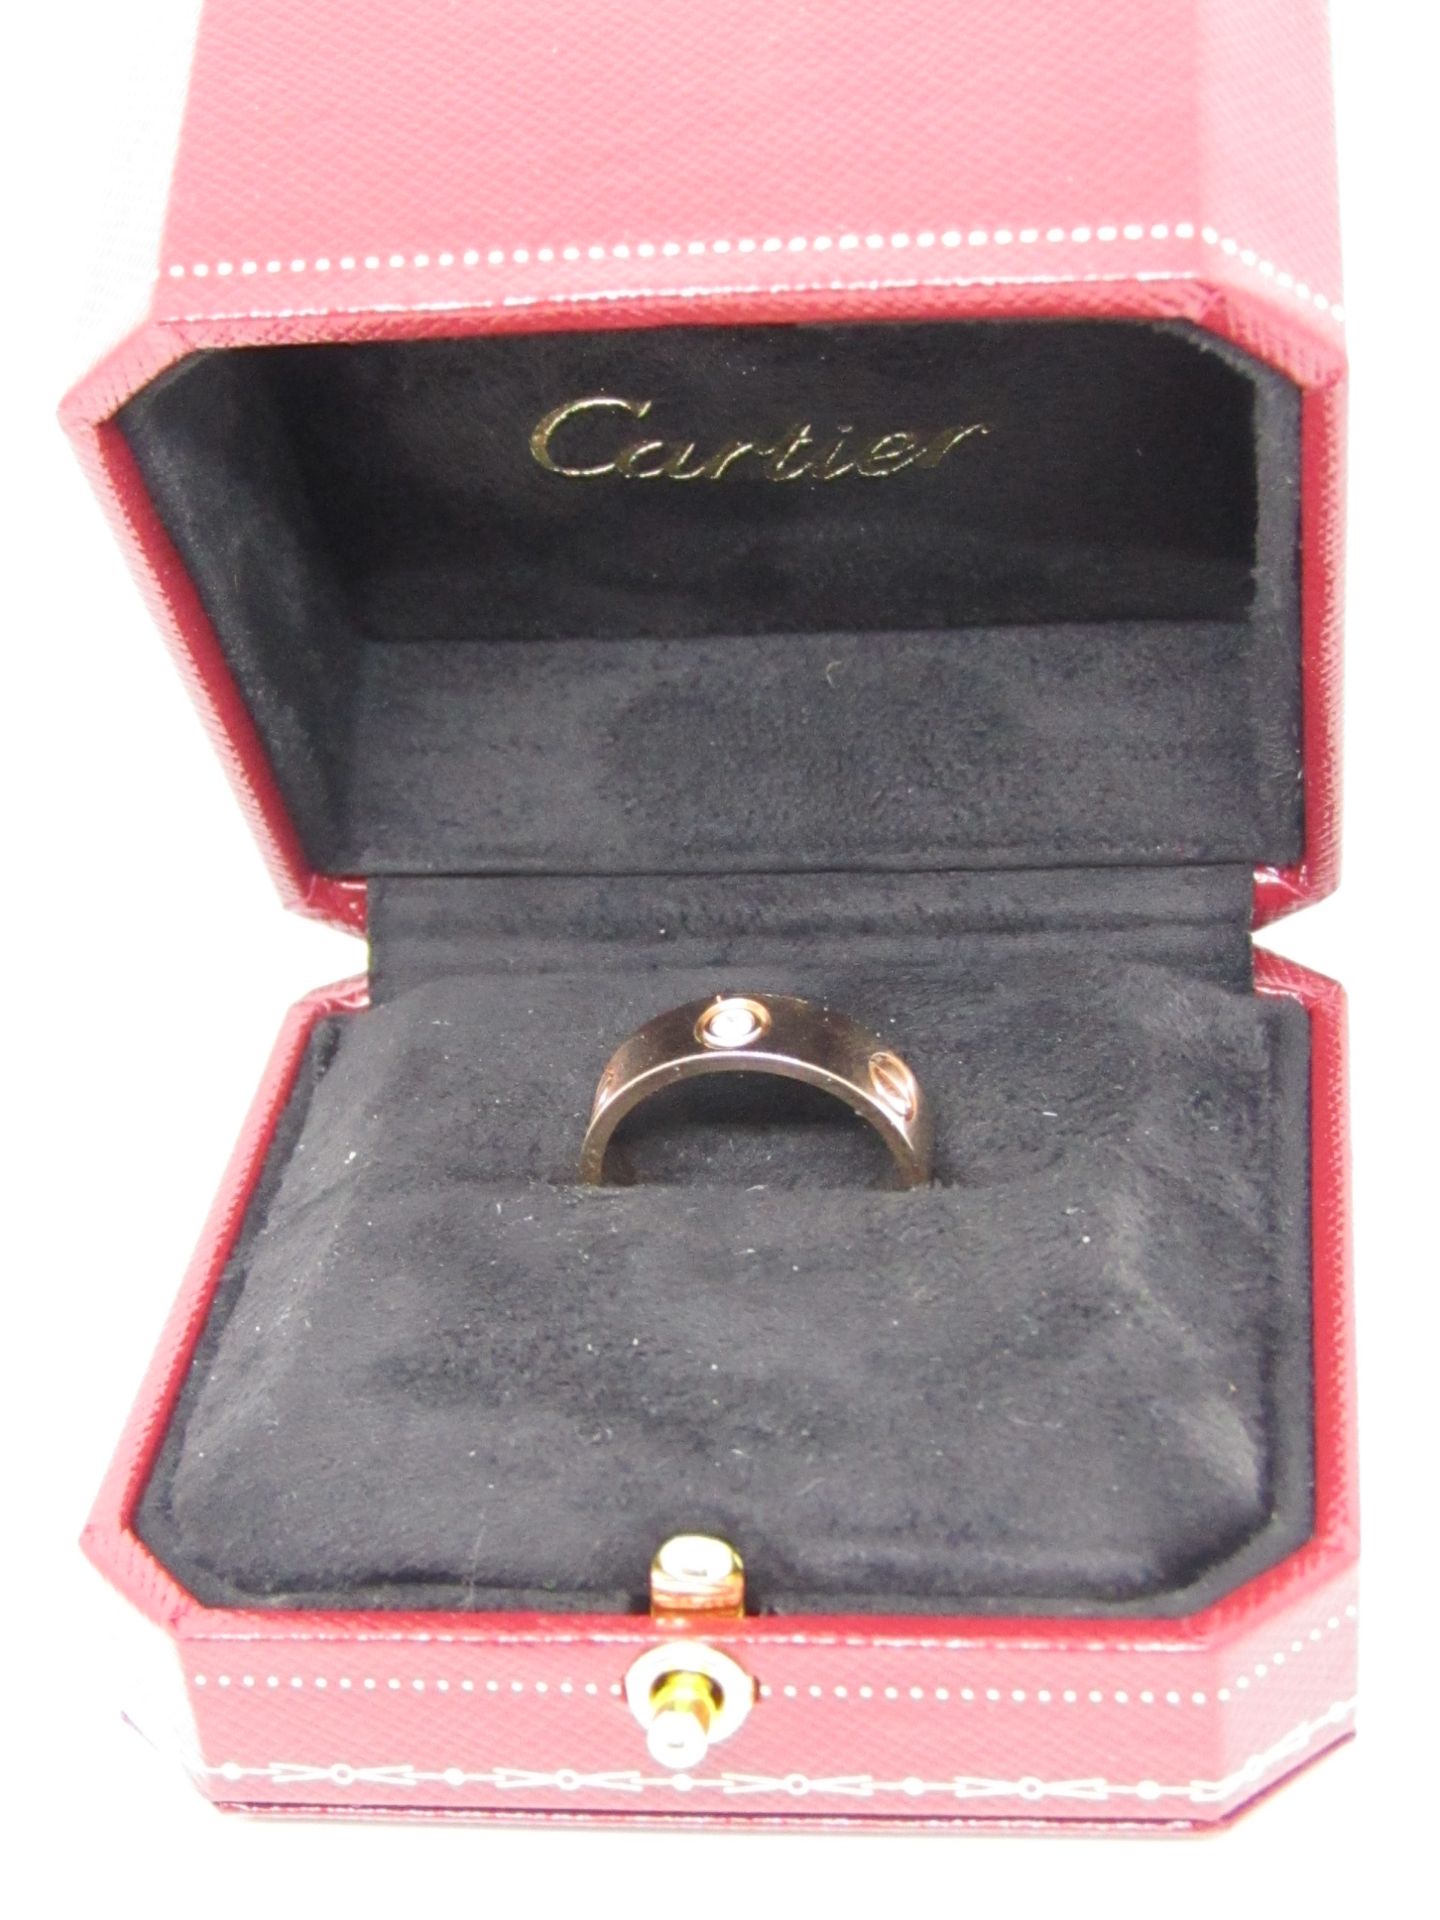 Cartier 18ct Pink Gold 0.02 ct Diamond Ring in original box with certificate RRP £1,800 - Image 4 of 5